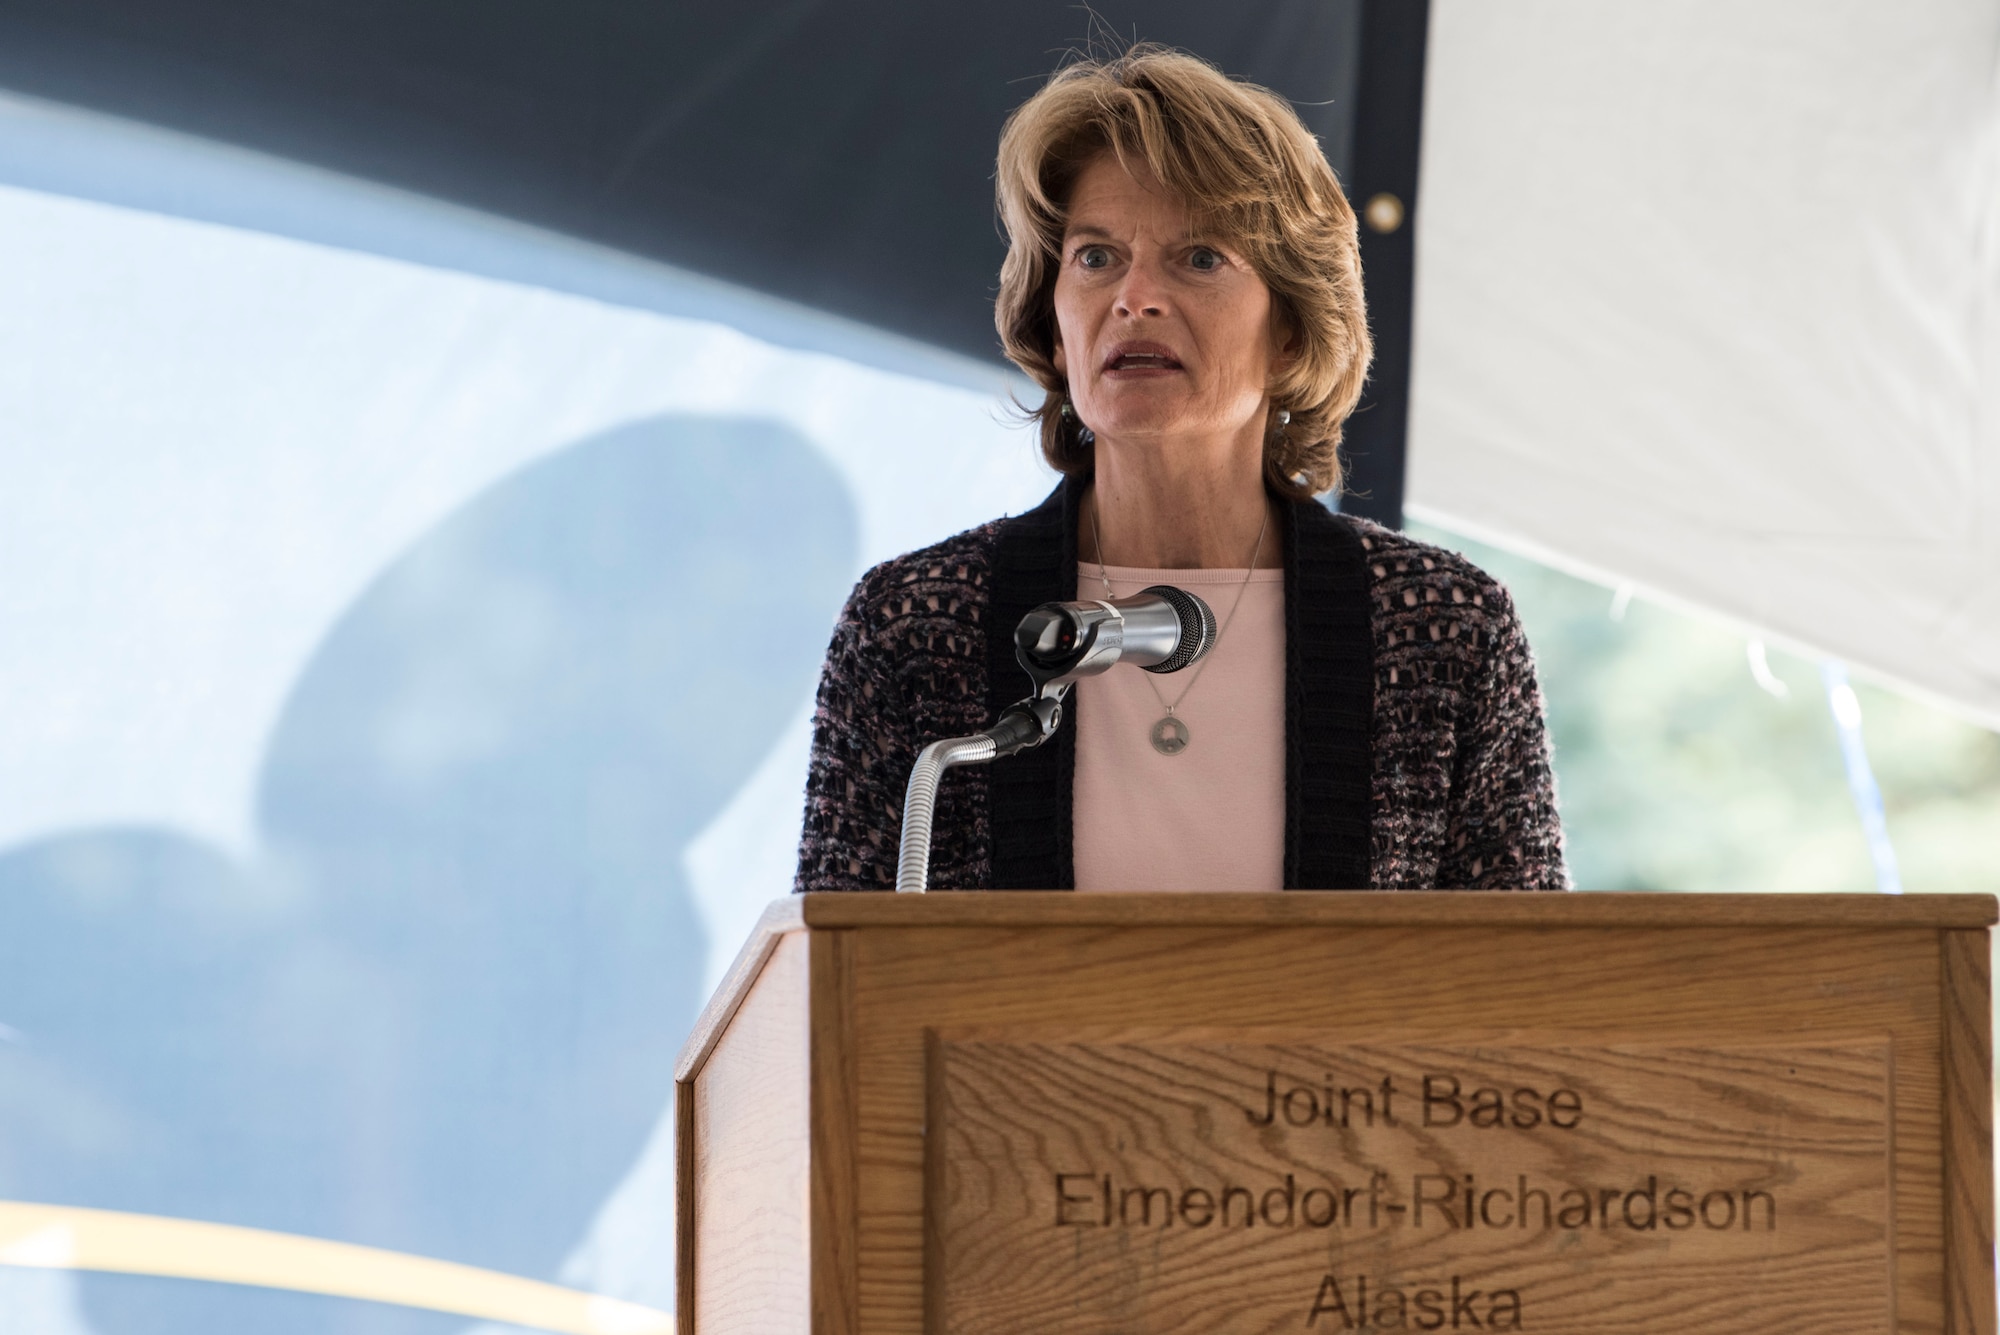 U.S. Senator Lisa Murkowski, talks about the importance of the Fisher House during the opening ceremony for Fisher House II at Joint Base Elmendorf-Richardson, Alaska, Sep. 10, 2018. The opening ceremony featured an array of key speakers, the 9th Army Band, Air Force Honor Guard, a ribbon-cutting, and a walk-through. The Fisher House program is a unique private-public partnership established to improve the quality of life for military members, retirees, veterans and their families.